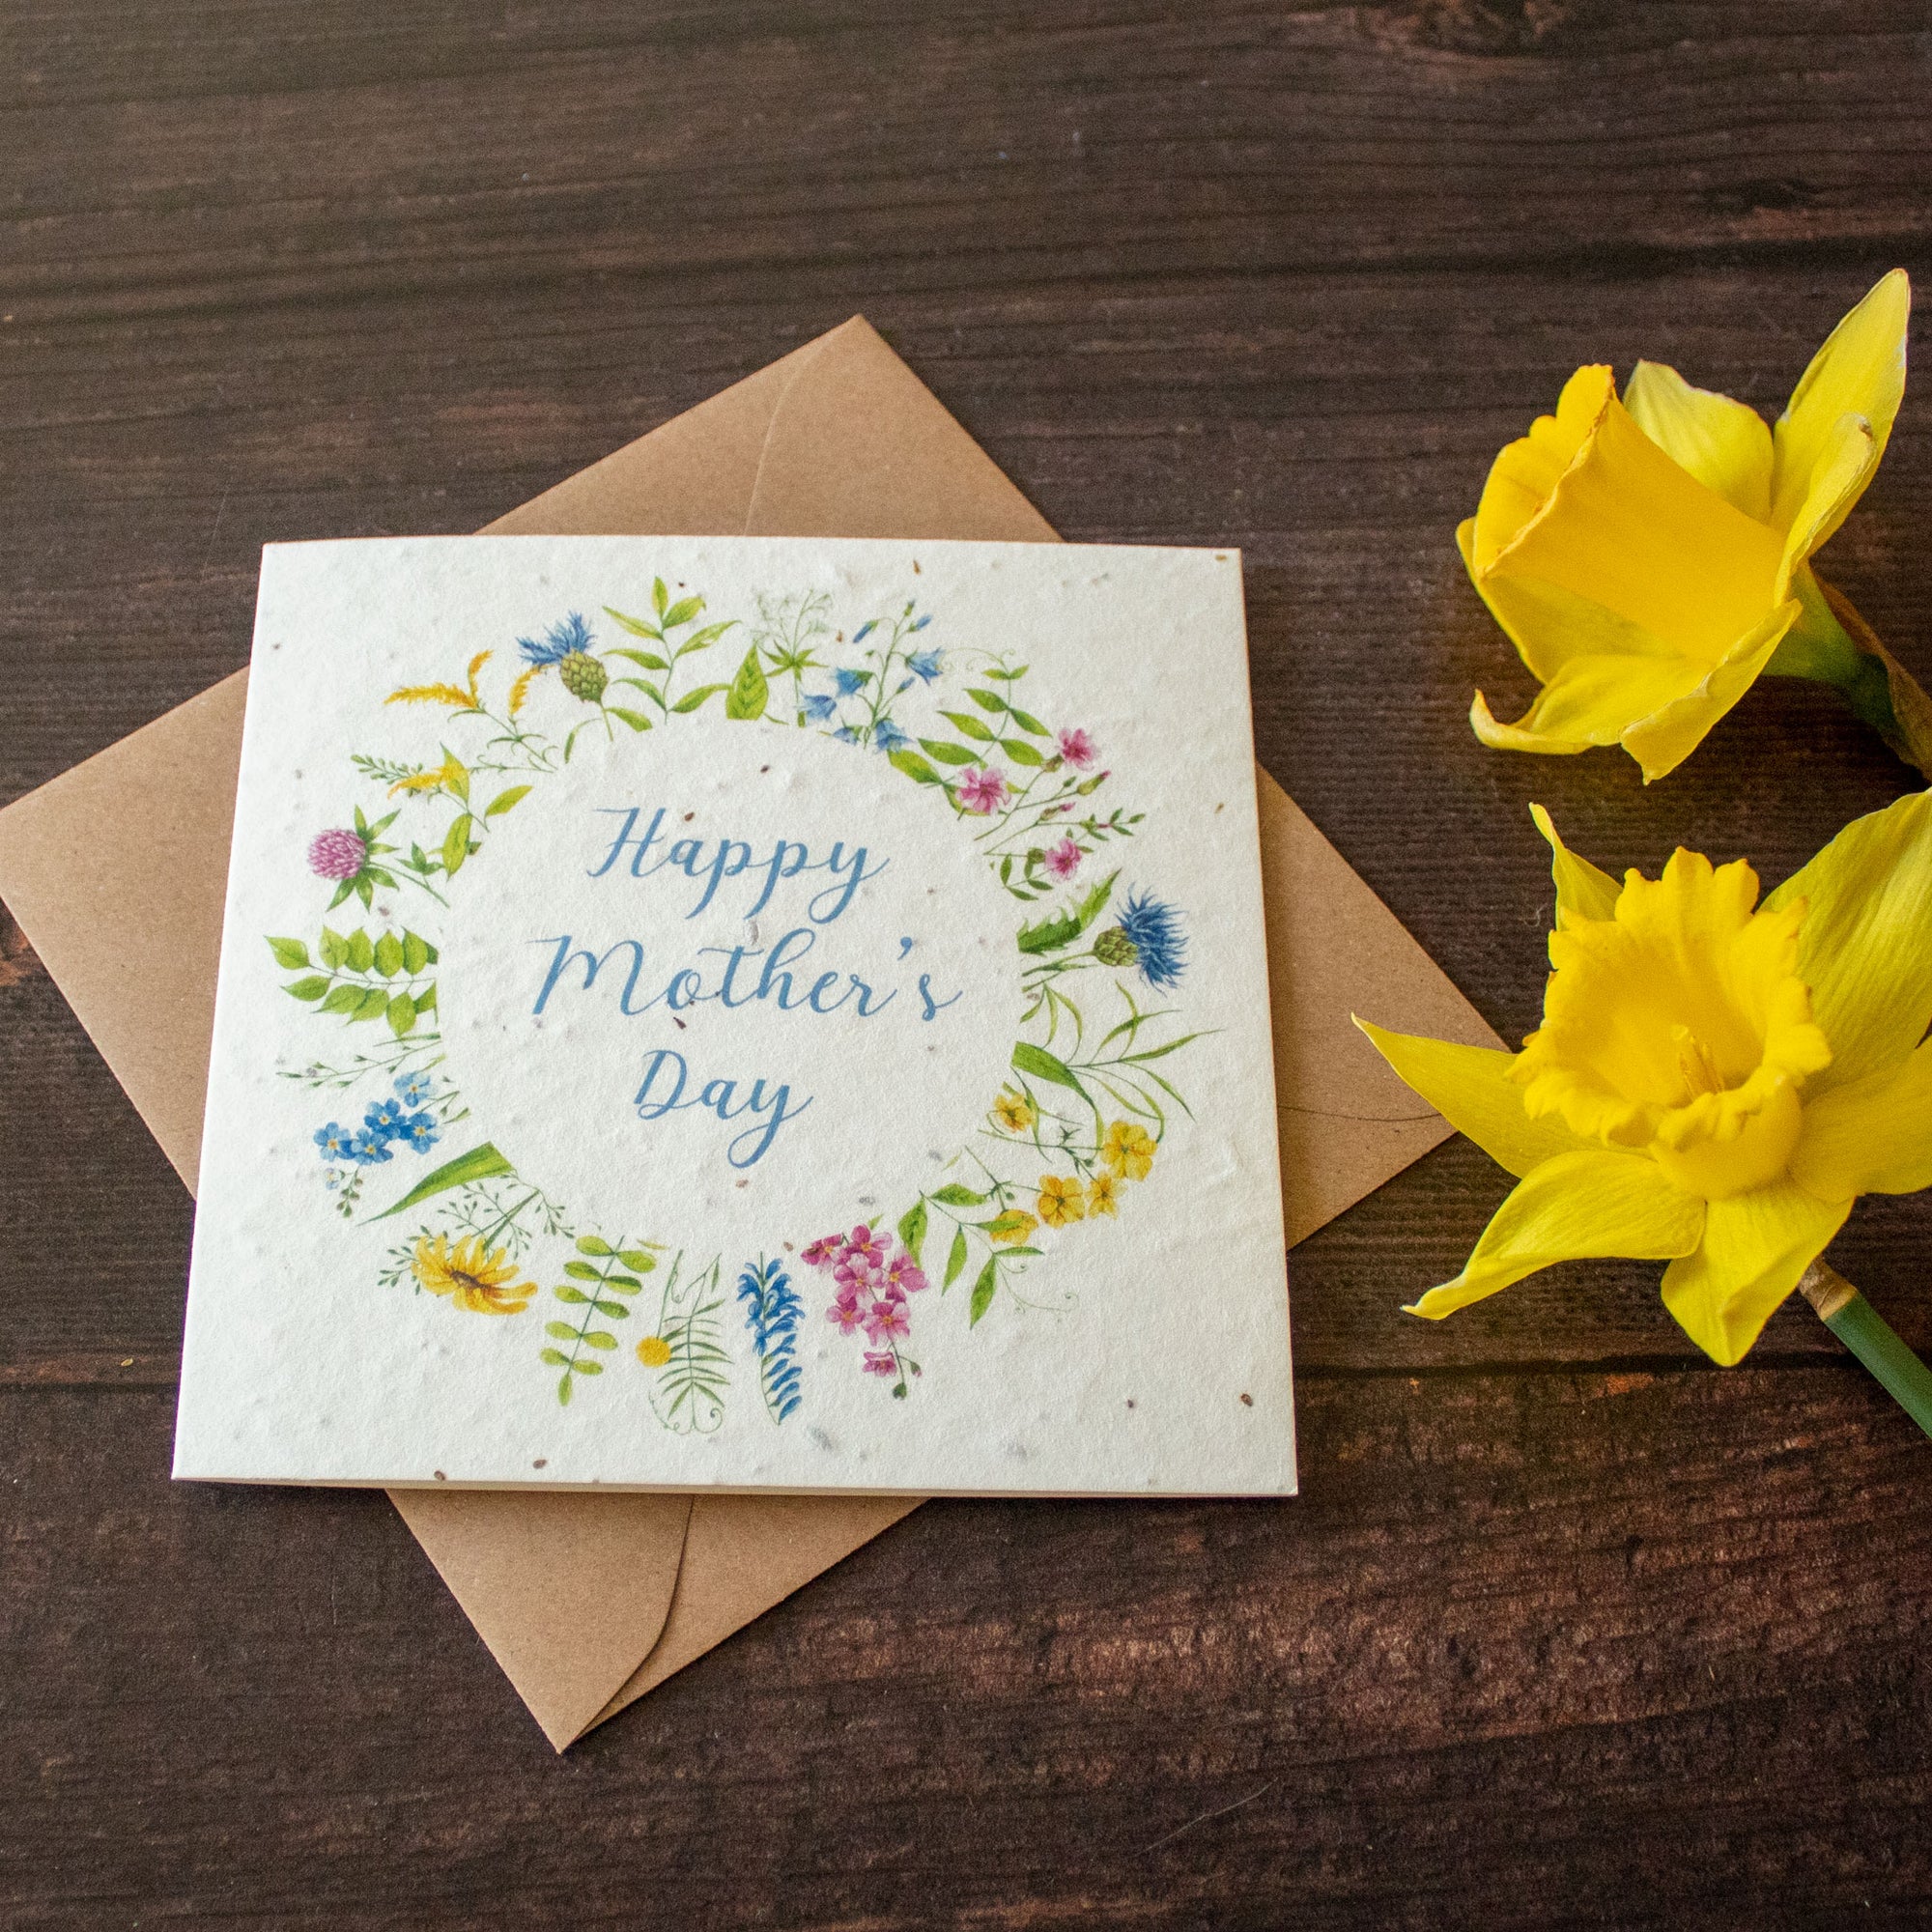 Plantable Mother's Day Card - Flower Wreath | Greetings Card - The Naughty Shrew